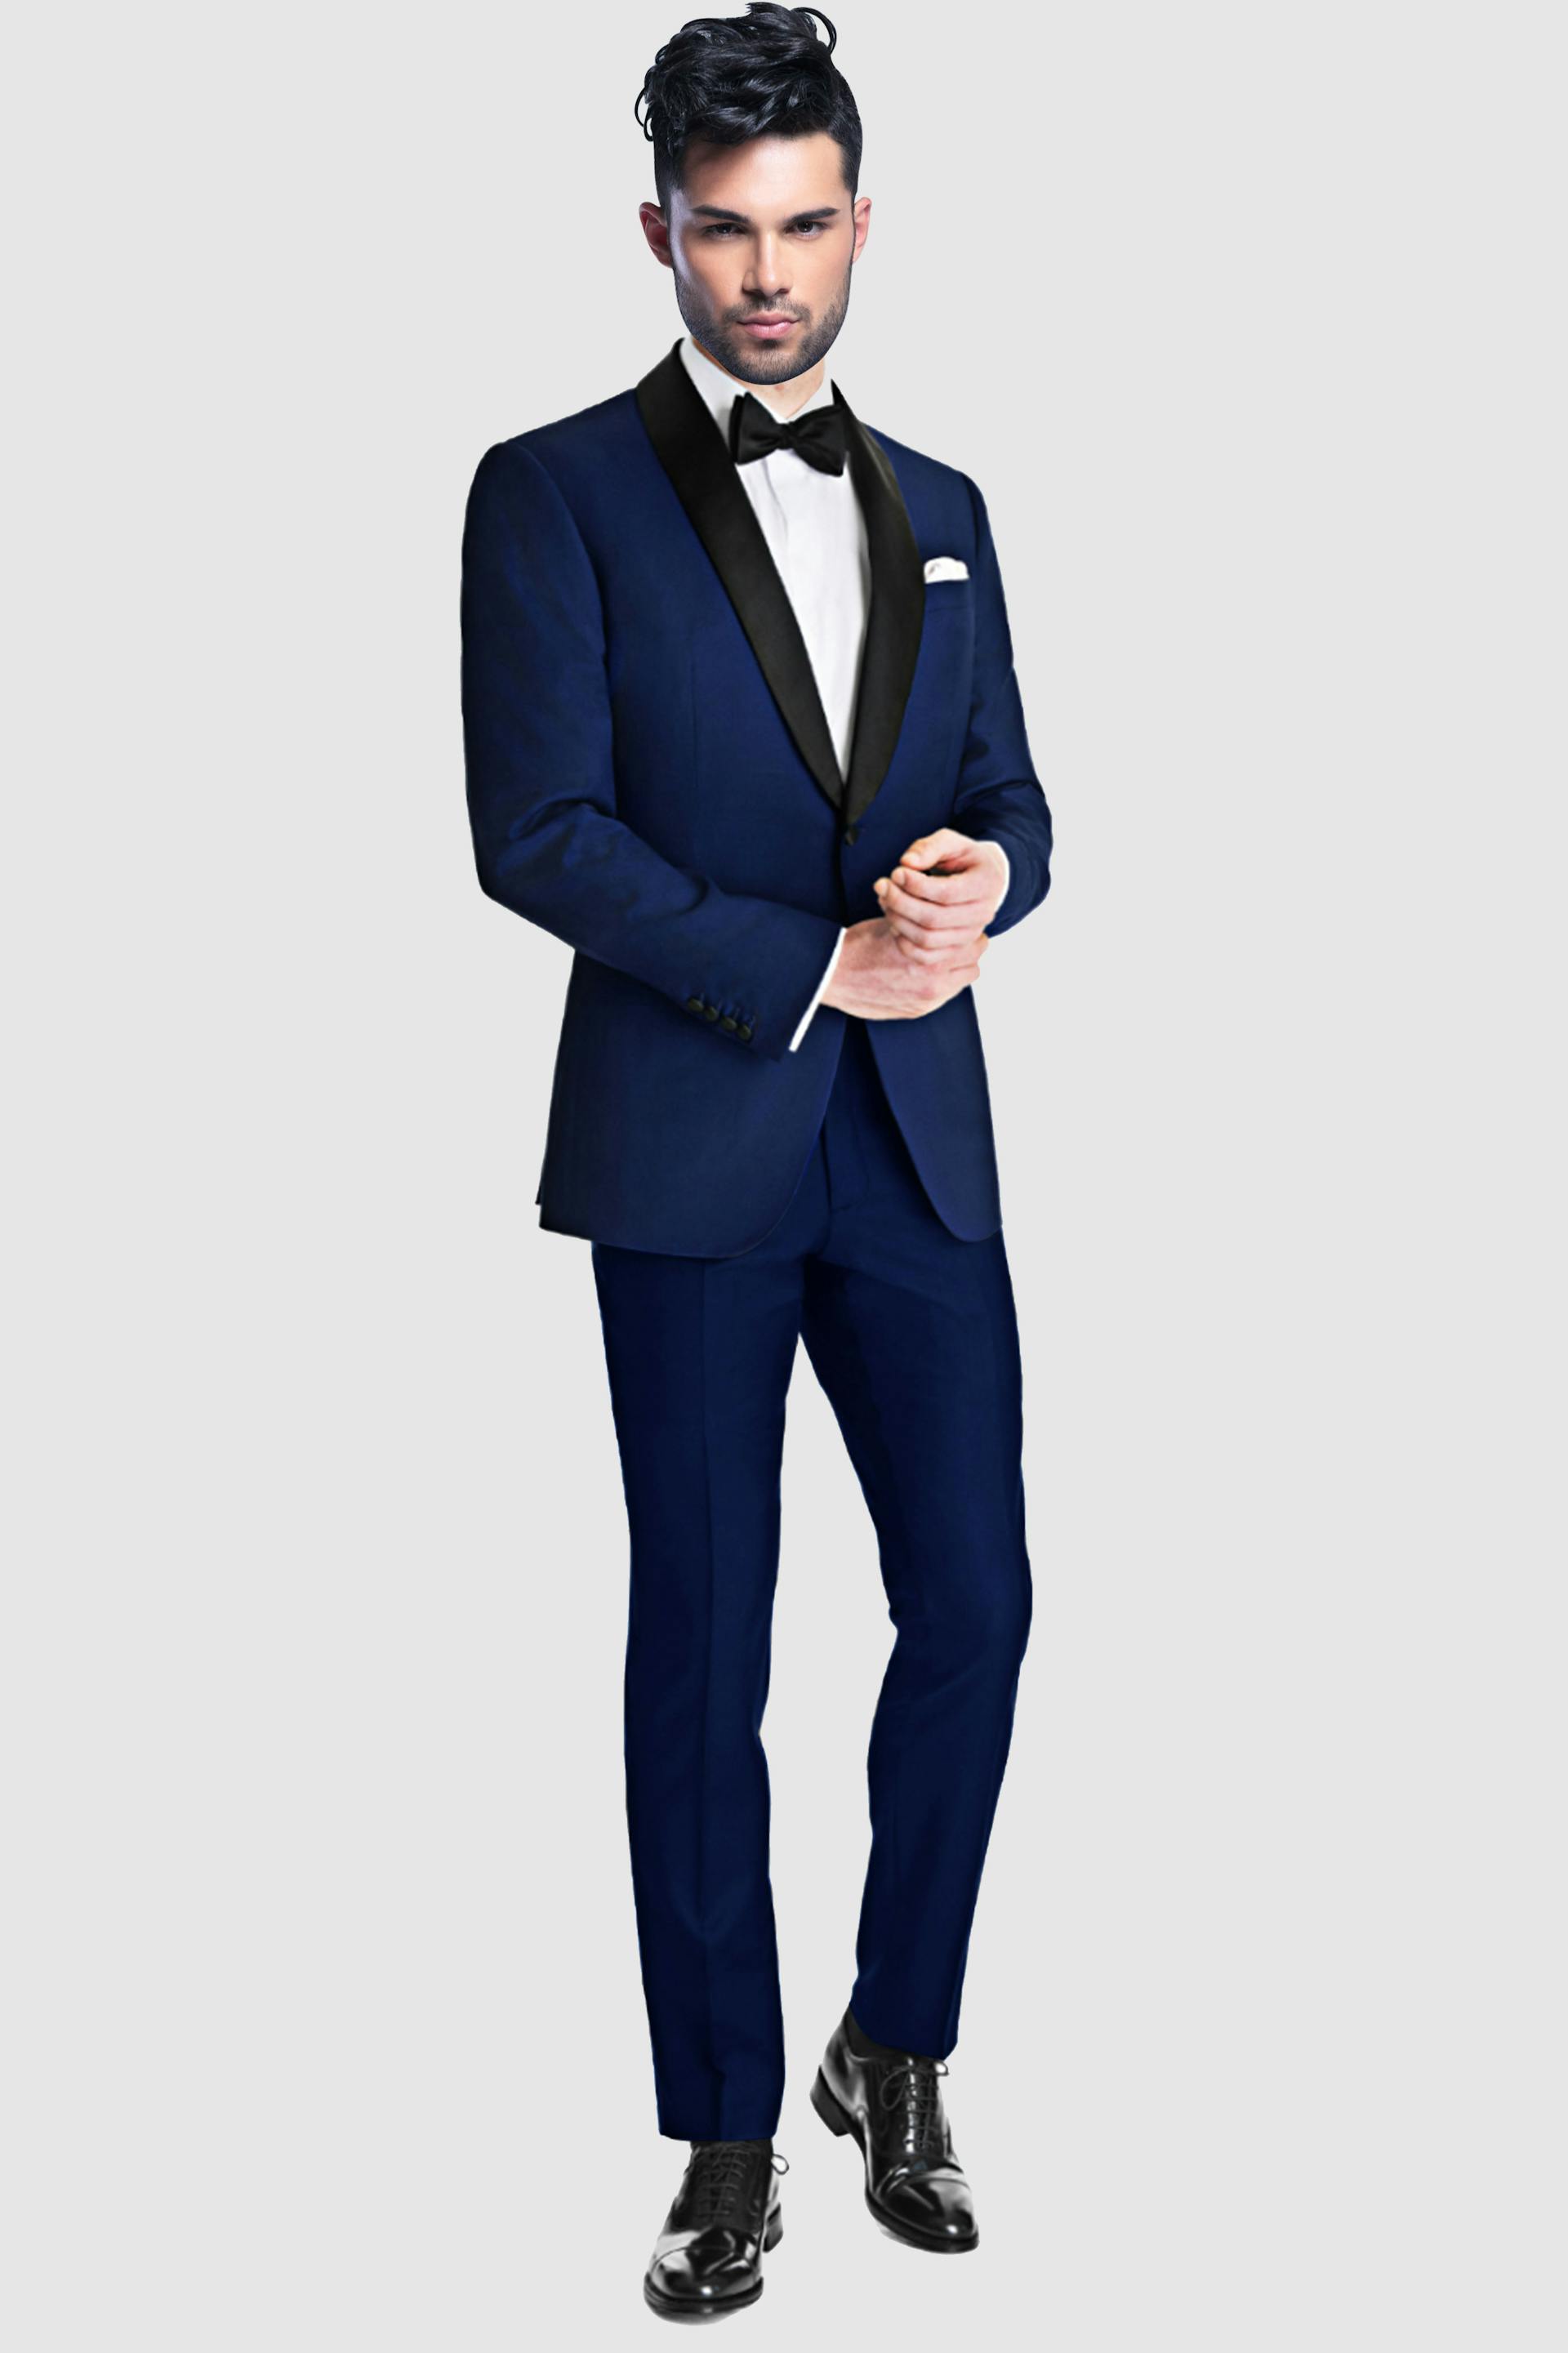 My Perfect Fit : Customize your Suits, Tuxedos, Blazers